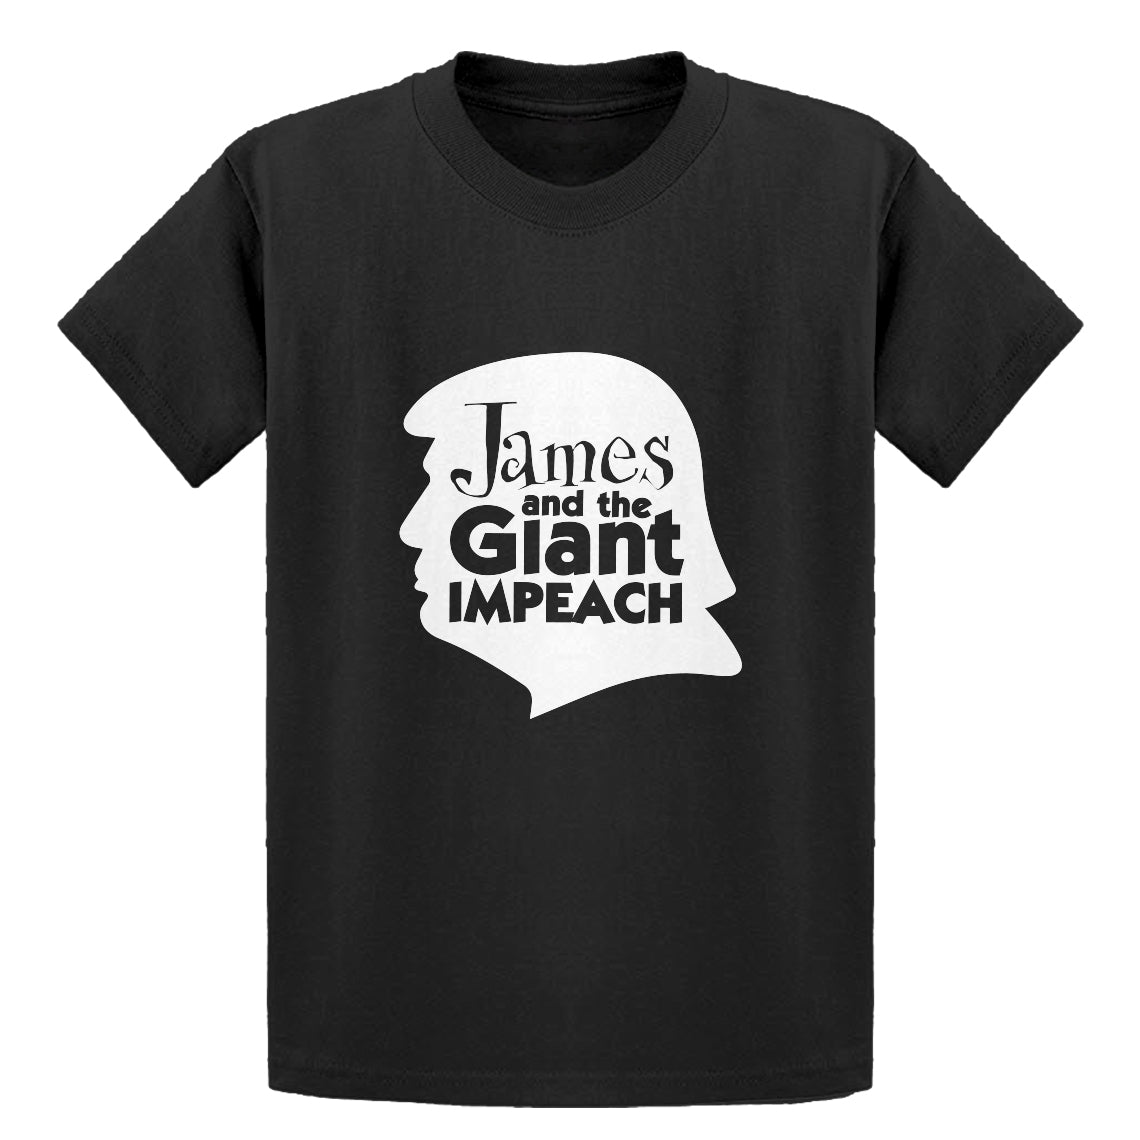 Youth James and the Giant Impeach Kids T-shirt